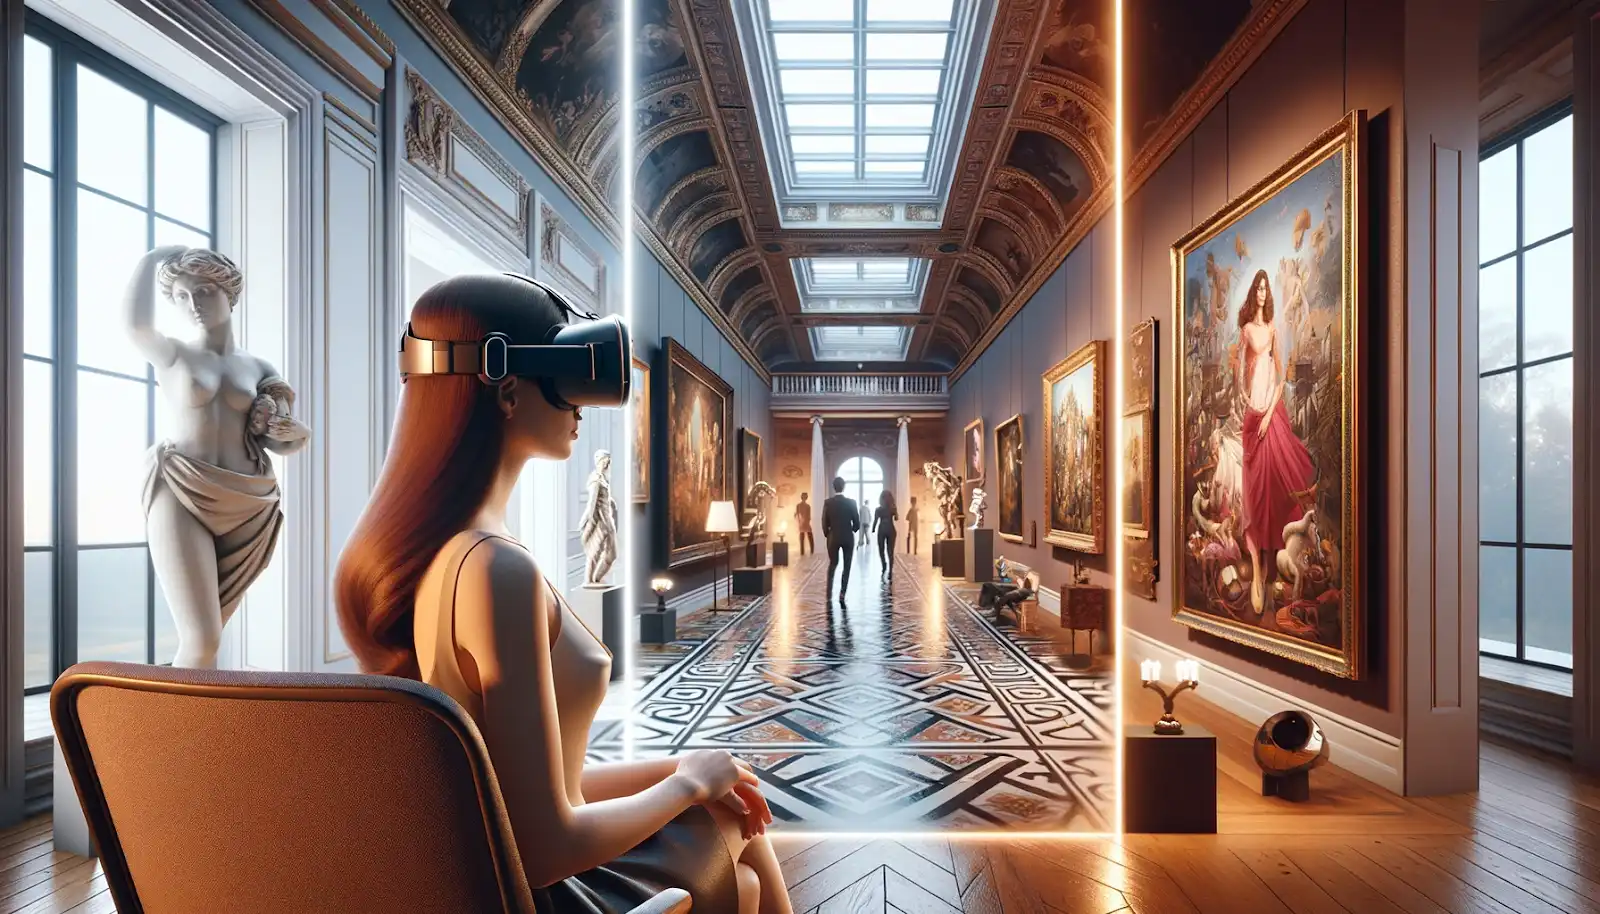 A woman wearing a VR headset sitting on a chair while the second part shows her in an art gallery.